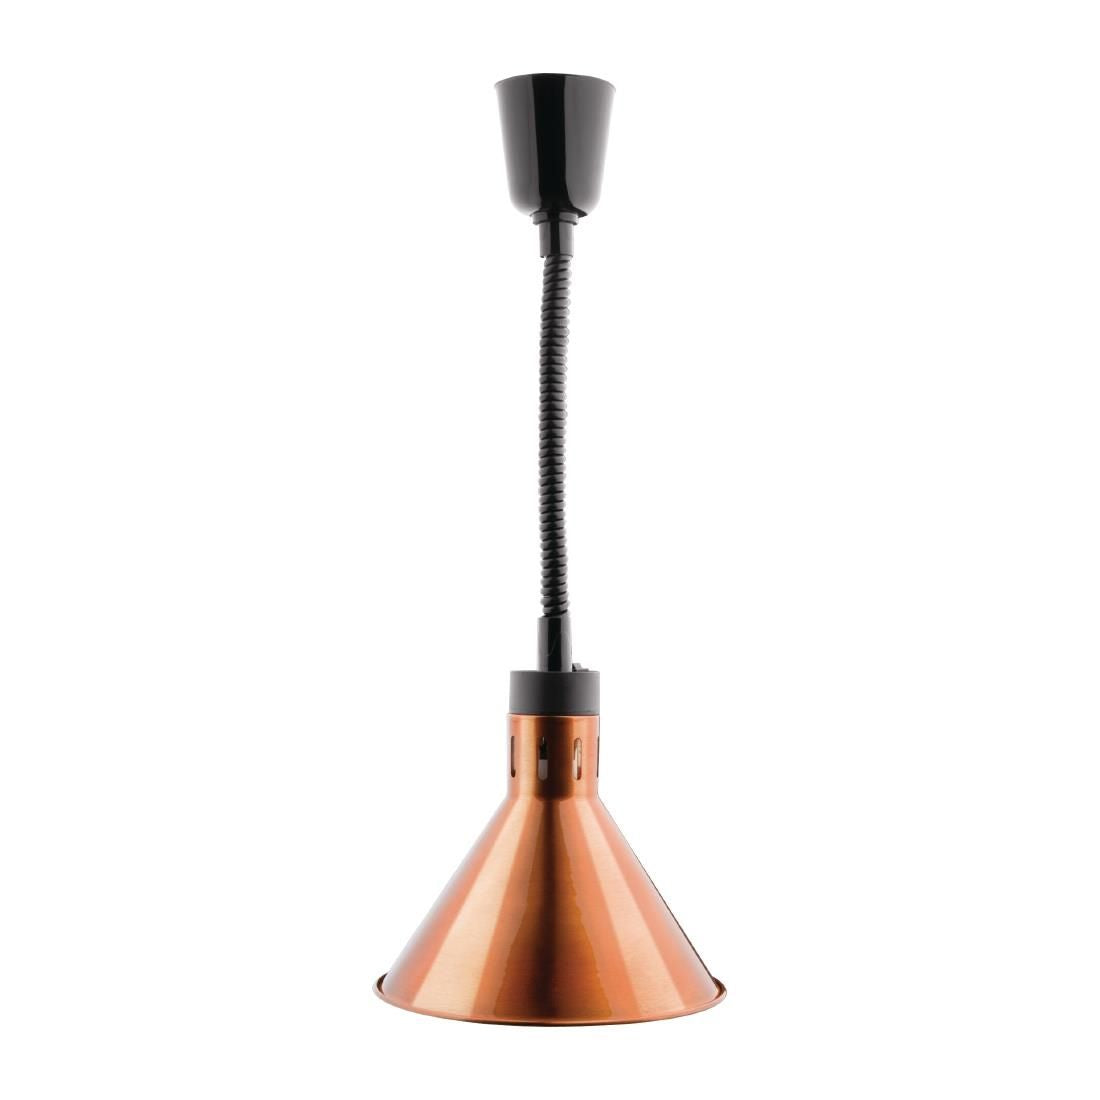 DY463 Buffalo Conical Retractable Heat Shade Copper Finish JD Catering Equipment Solutions Ltd